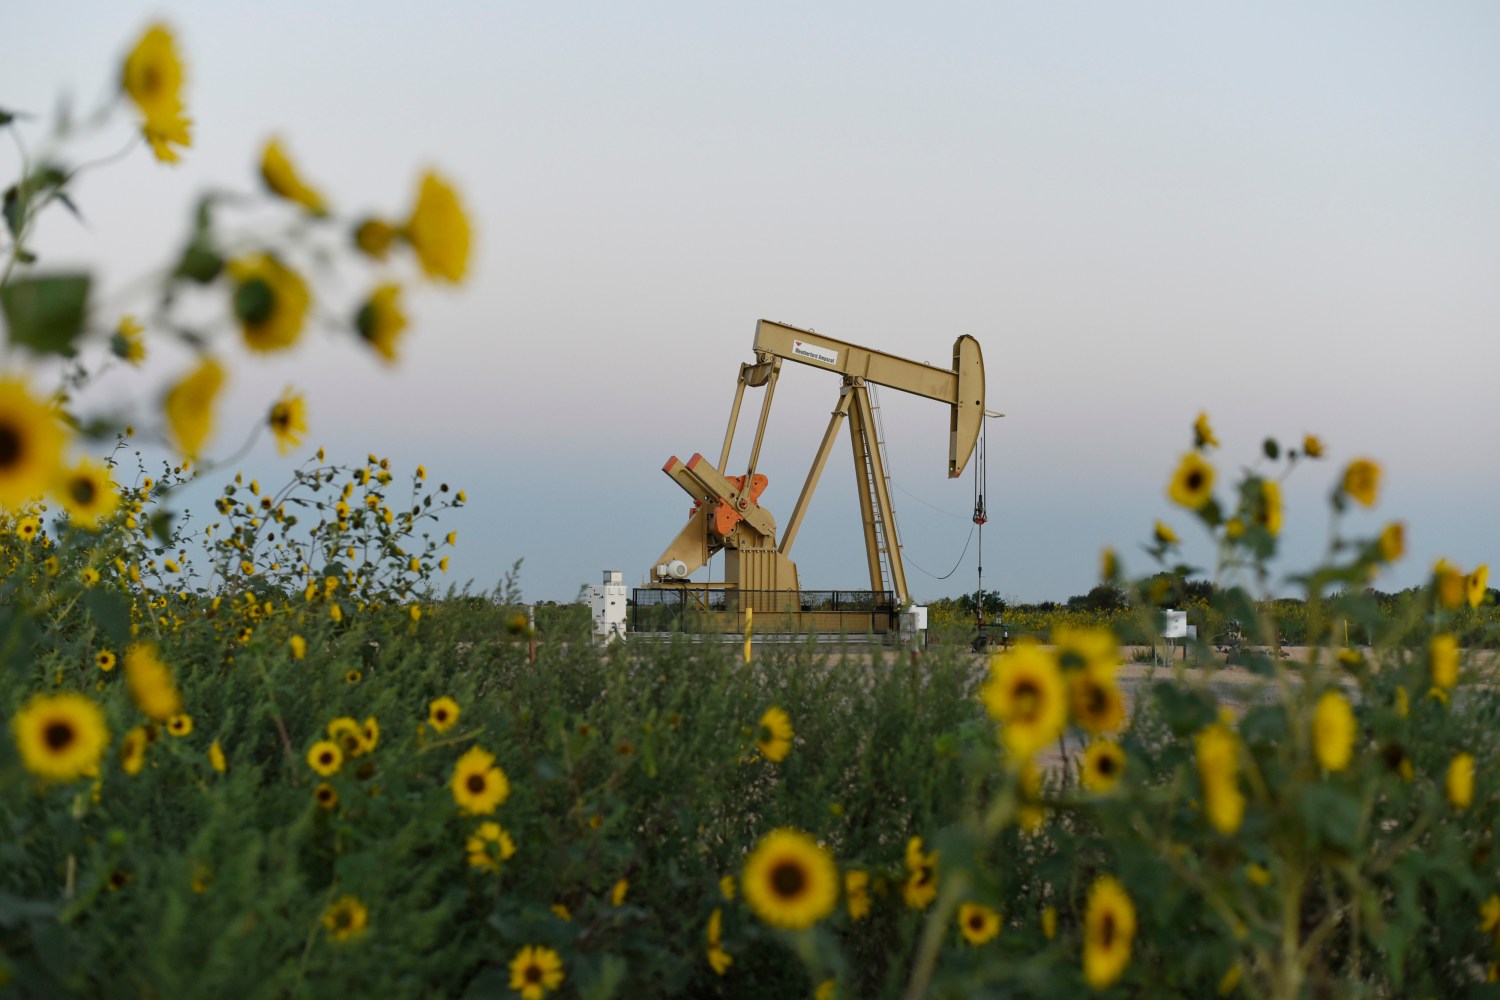 A pump jack operates at a well site leased by Devon Energy Production Company near Guthrie, Oklahoma September 15, 2015. REUTERS/Nick Oxford - TM3EB9F0WM801